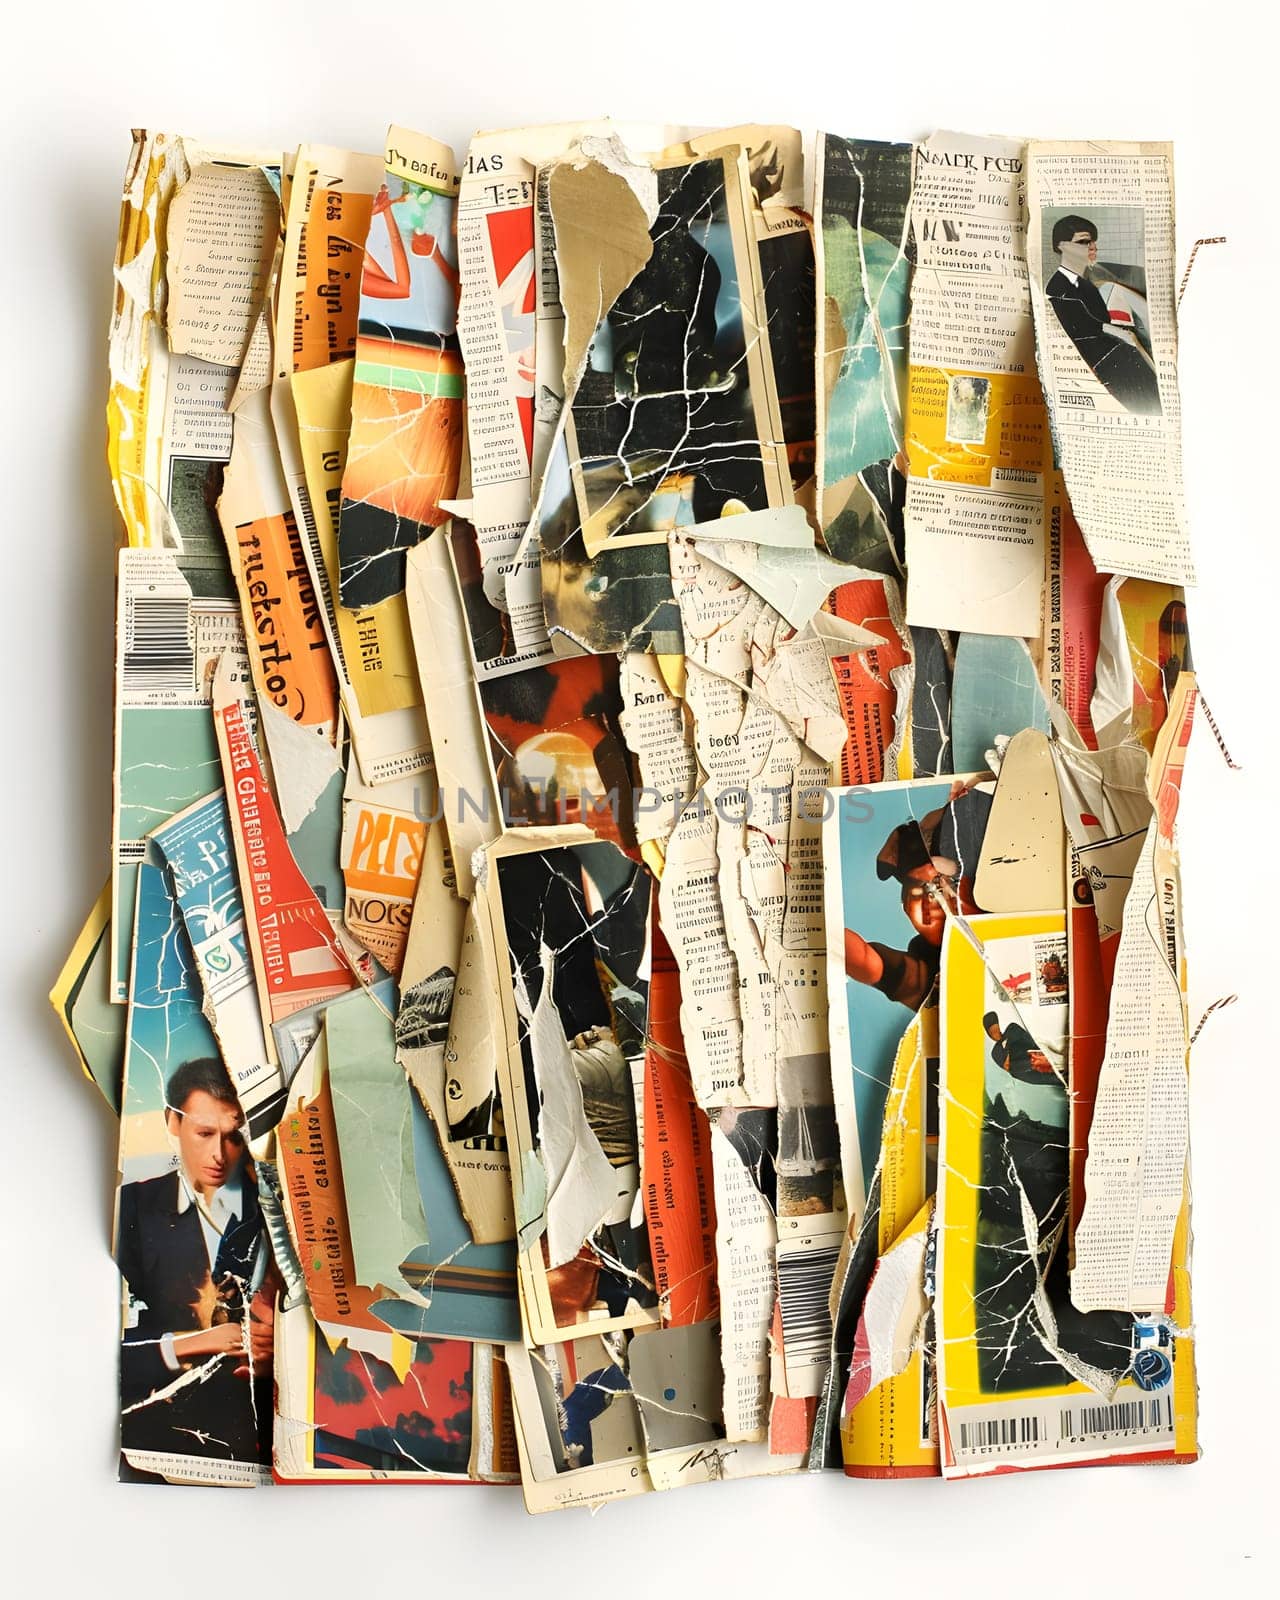 A collage made of old magazines and newspapers featuring a man in a tuxedo, a mix of visual art elements like painting, font, and patterns displayed on rectangular linens